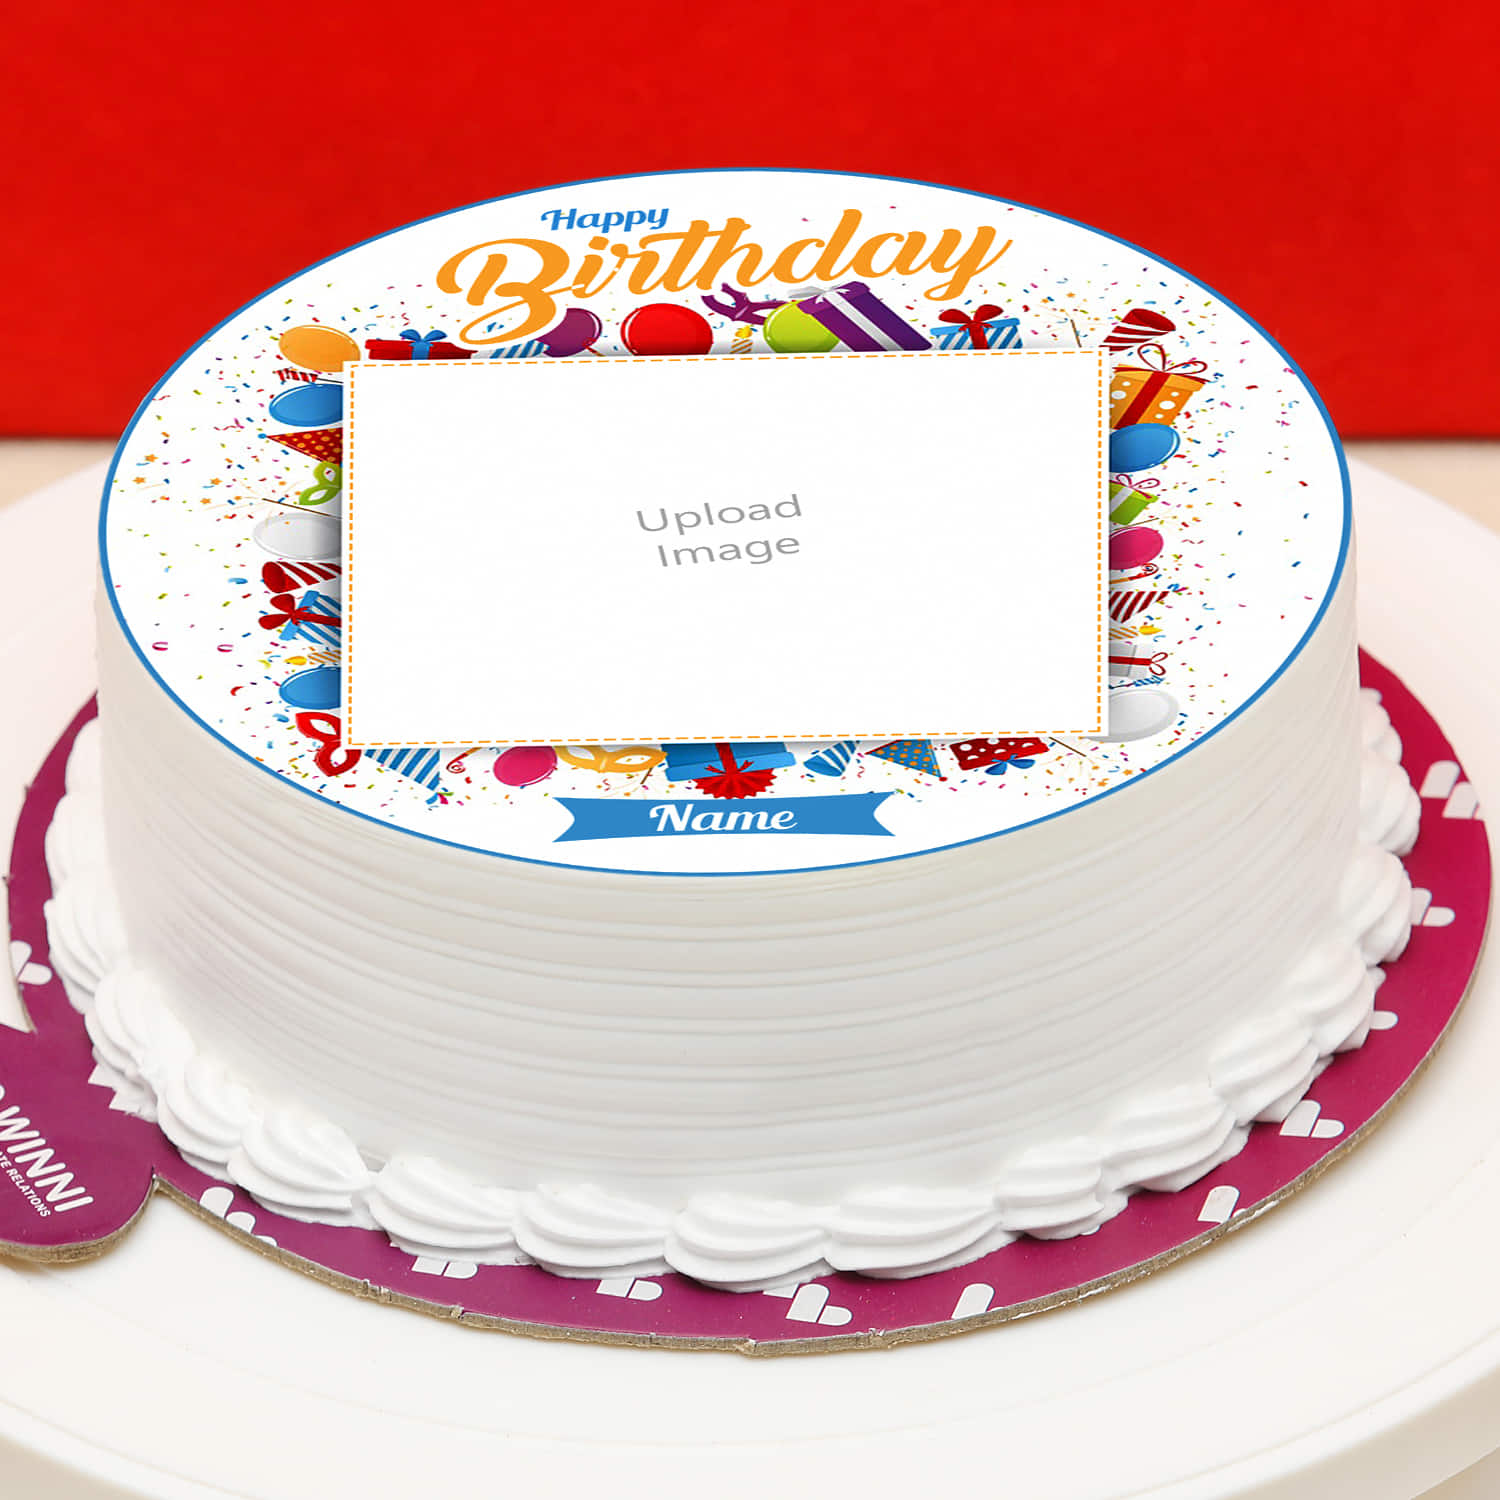 created Happy Birthday wishes Cake with name and Photo